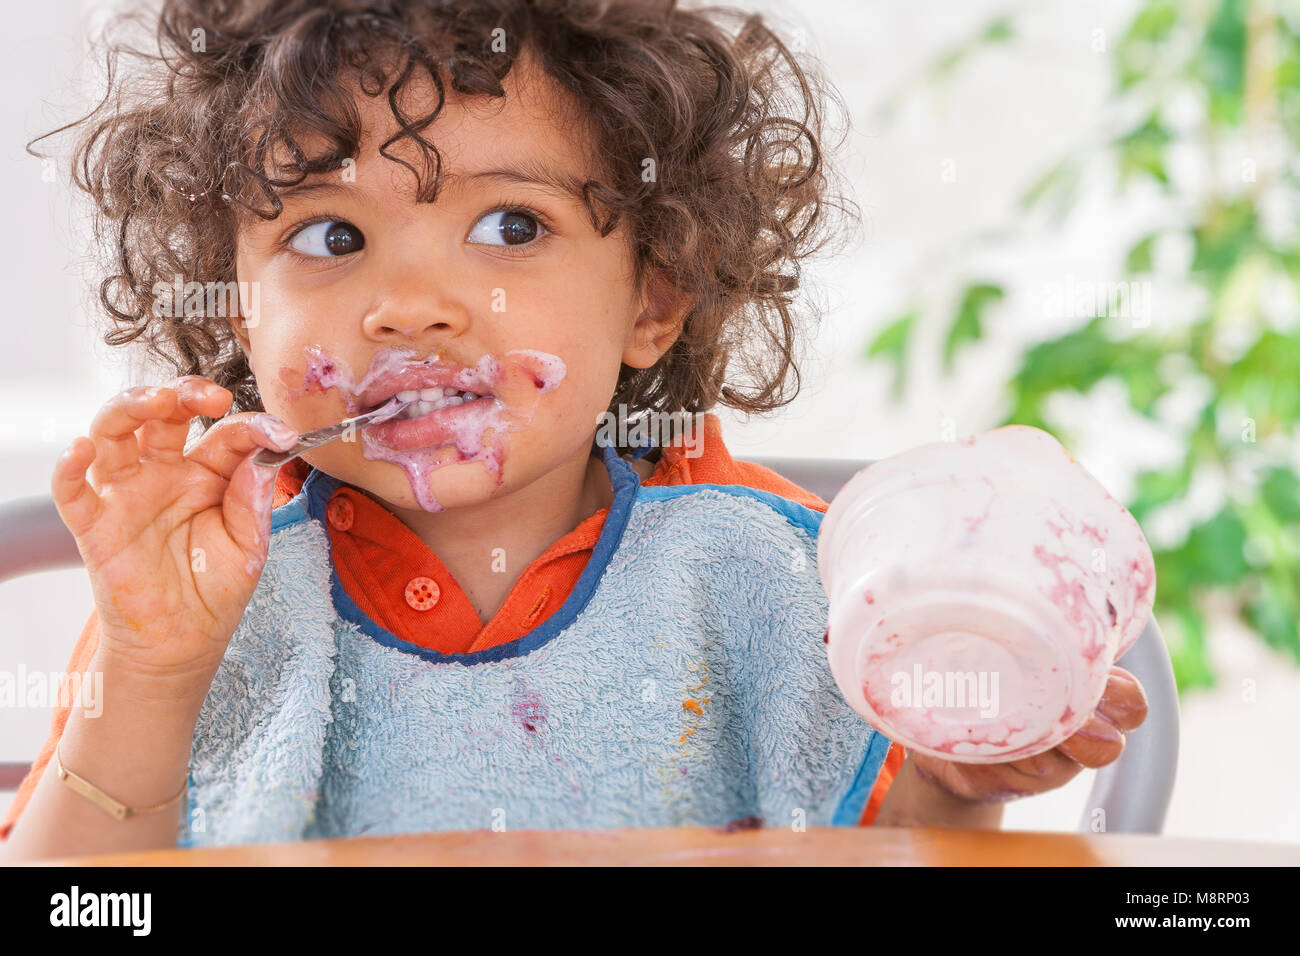 Toddler sitting in highchair and eating greek yogurt. Baby learning to eat and has yogurt on face and hair Stock Photo